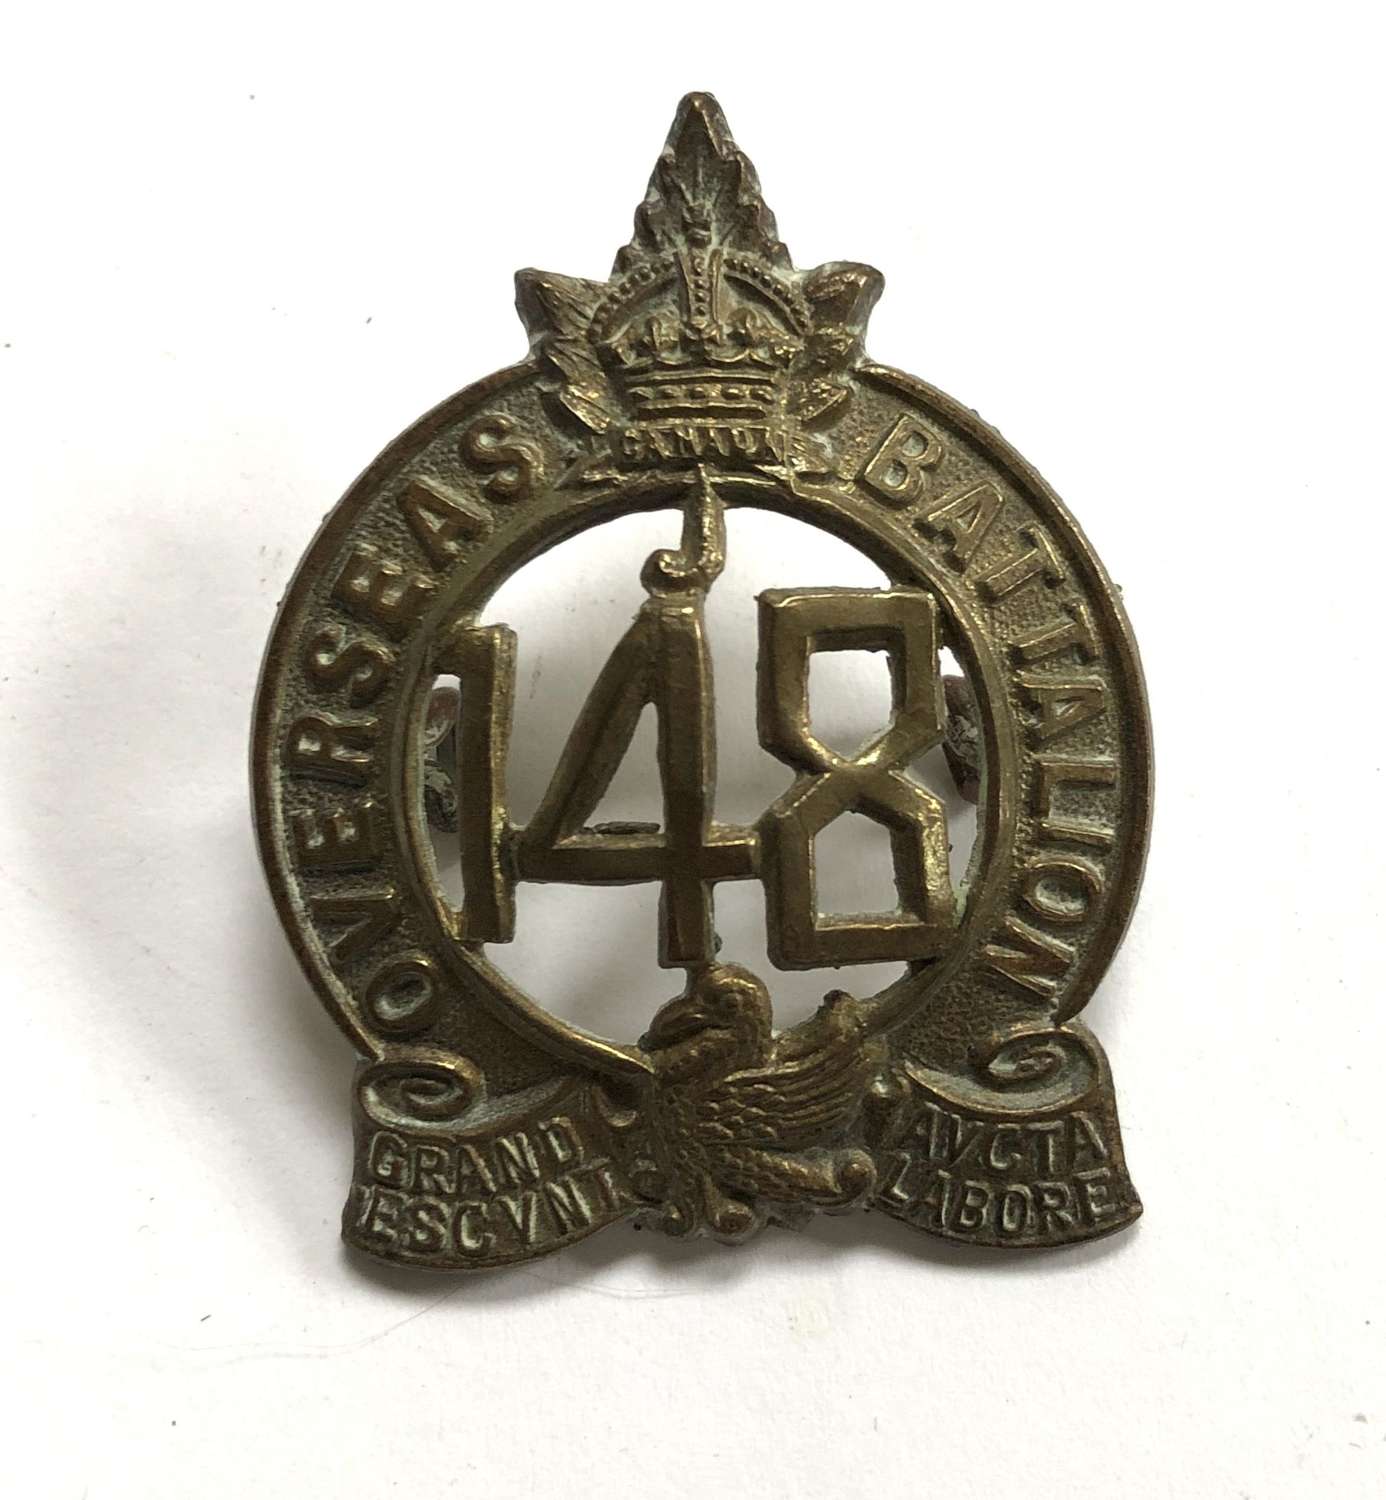 Canadian 148th Bn. CEF cap badge by Tiptaft